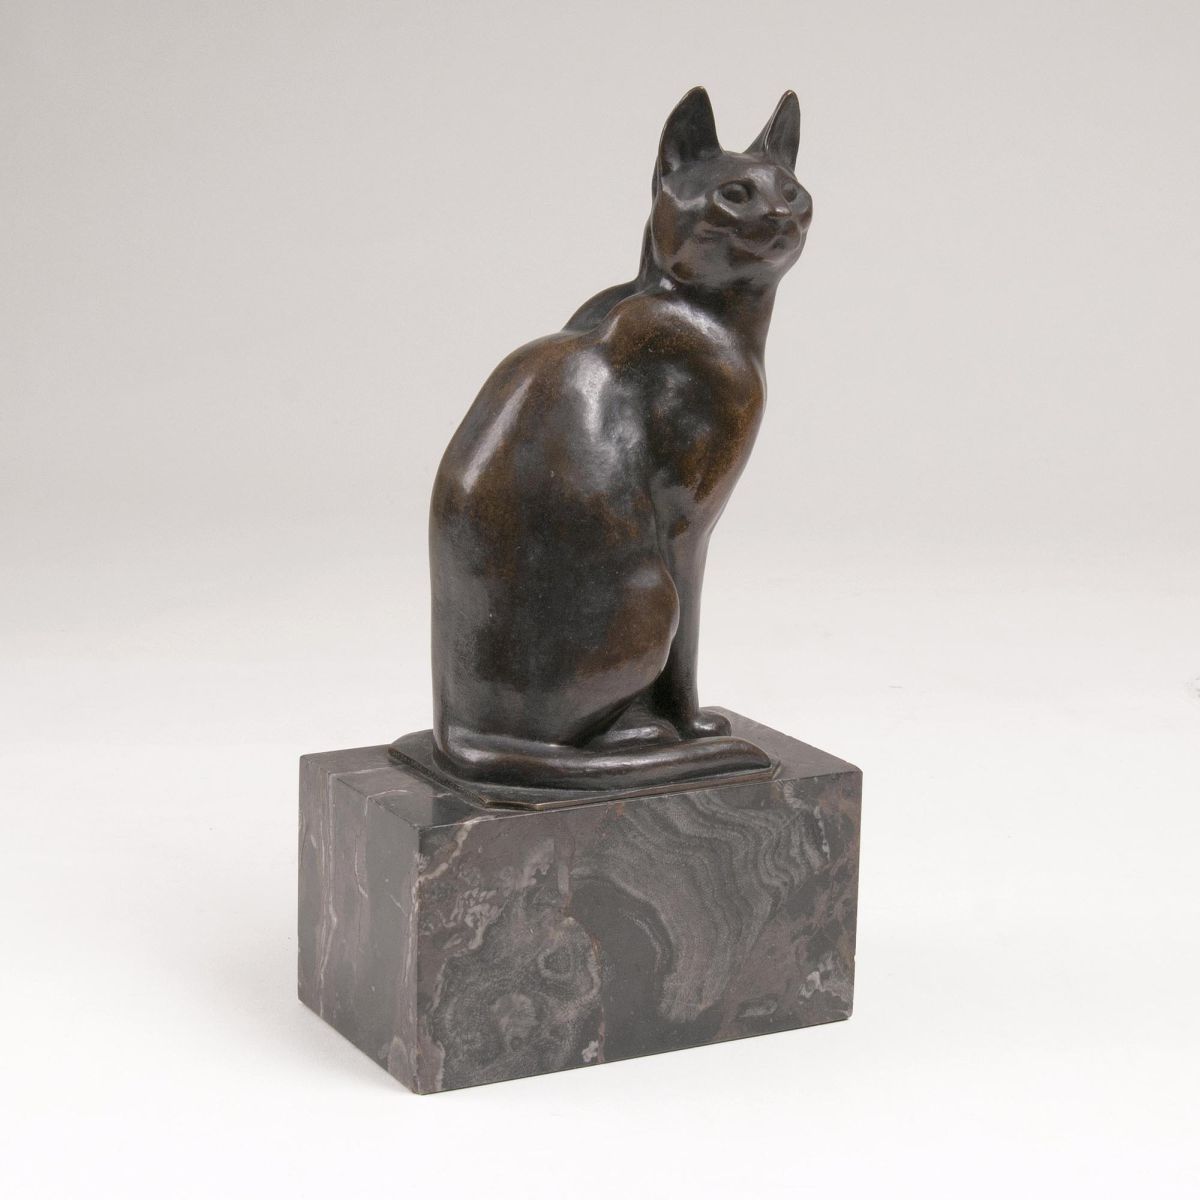 An Animal Figure 'Seated Cat' - image 2